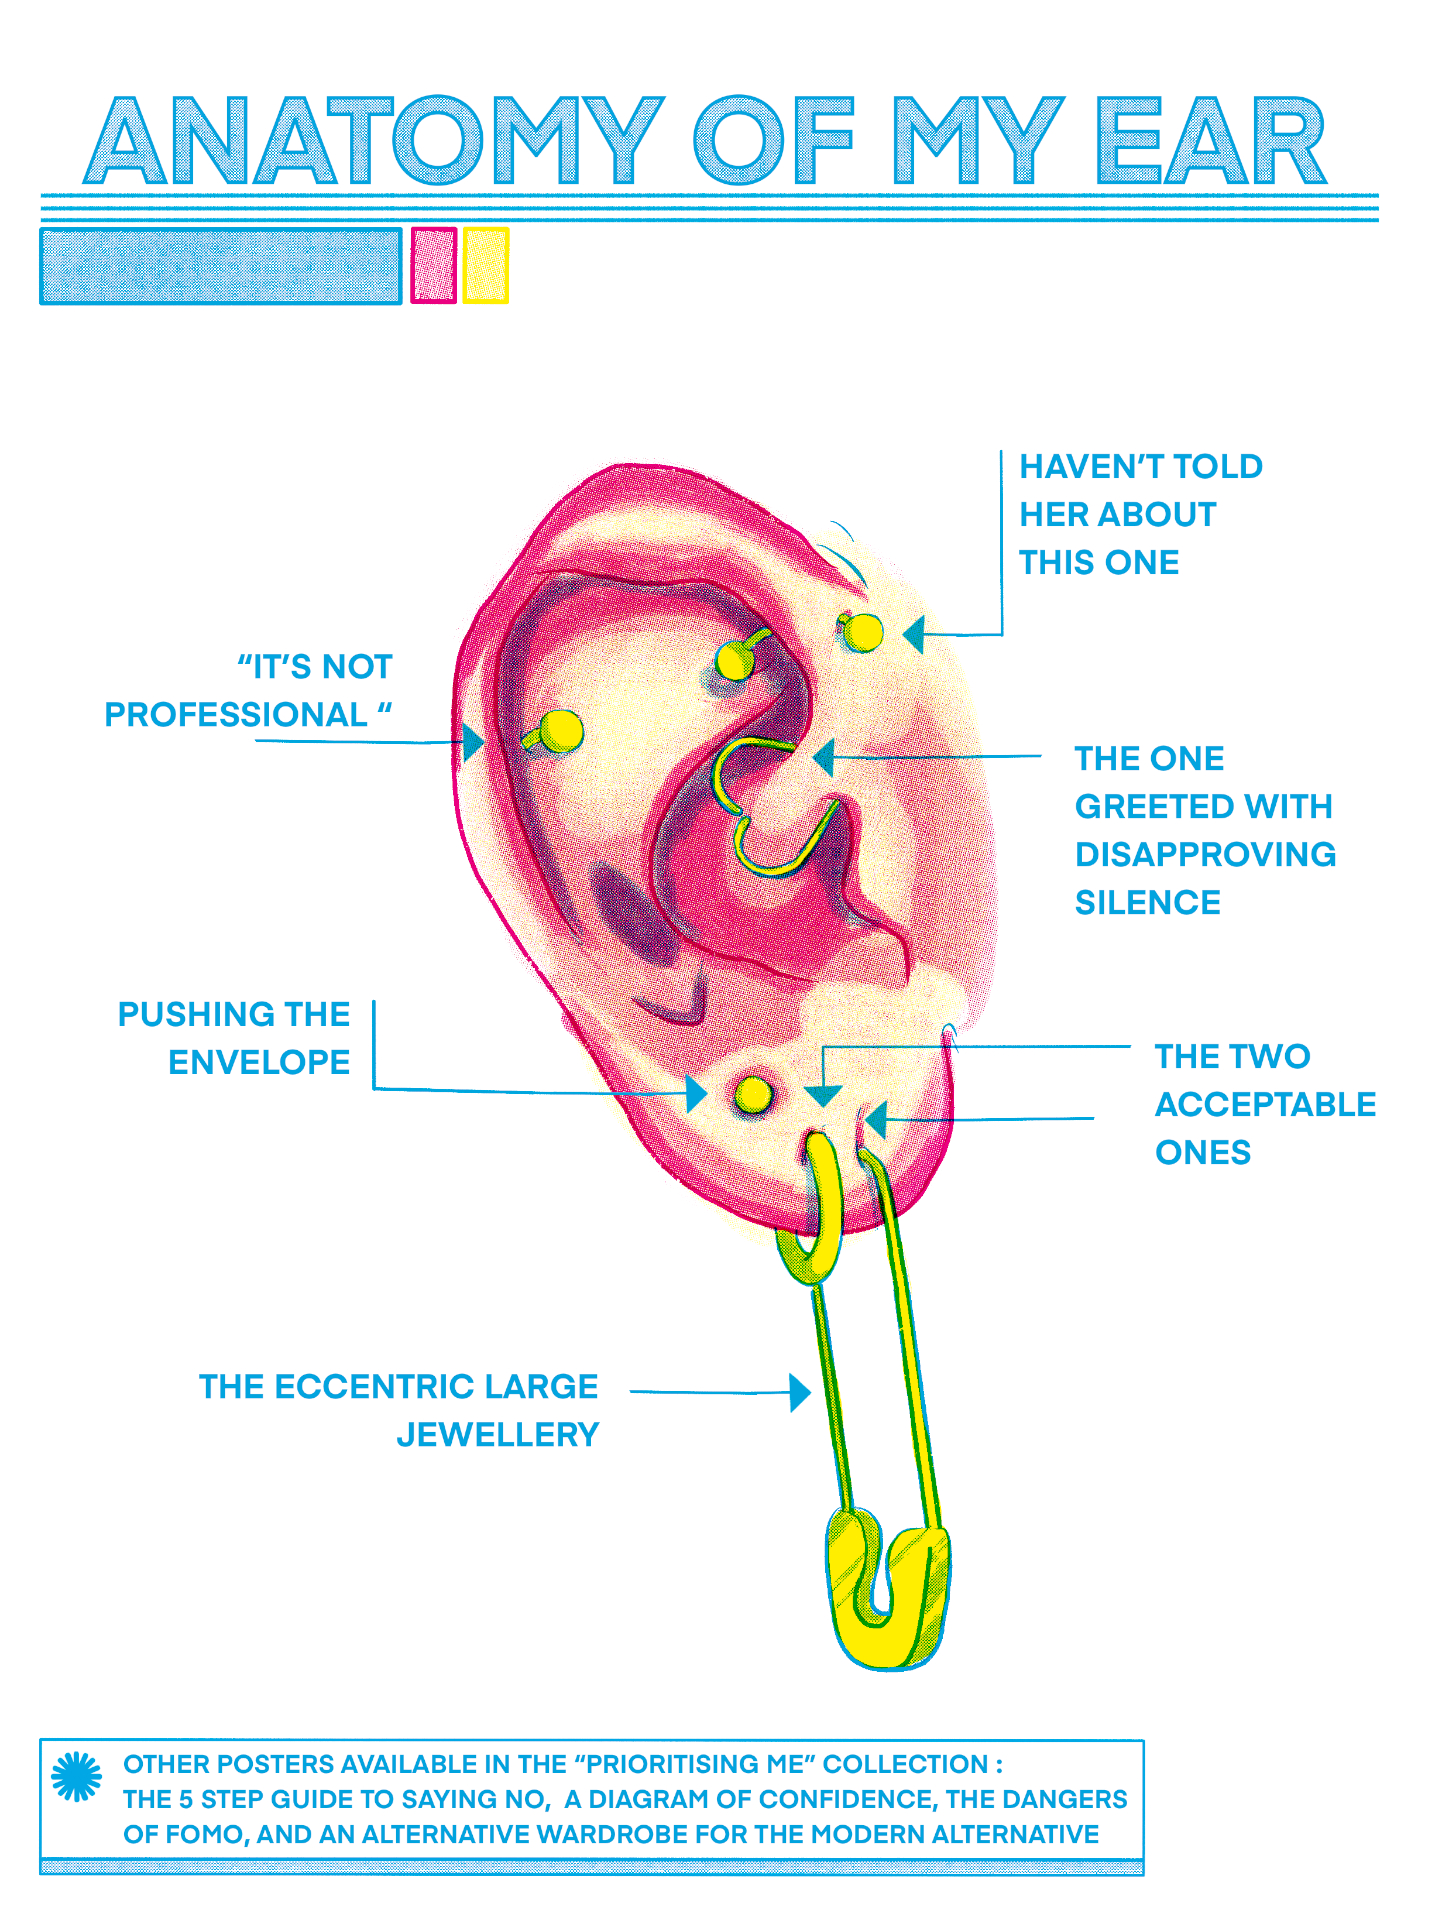 Poster showing Anatomy of the Ear